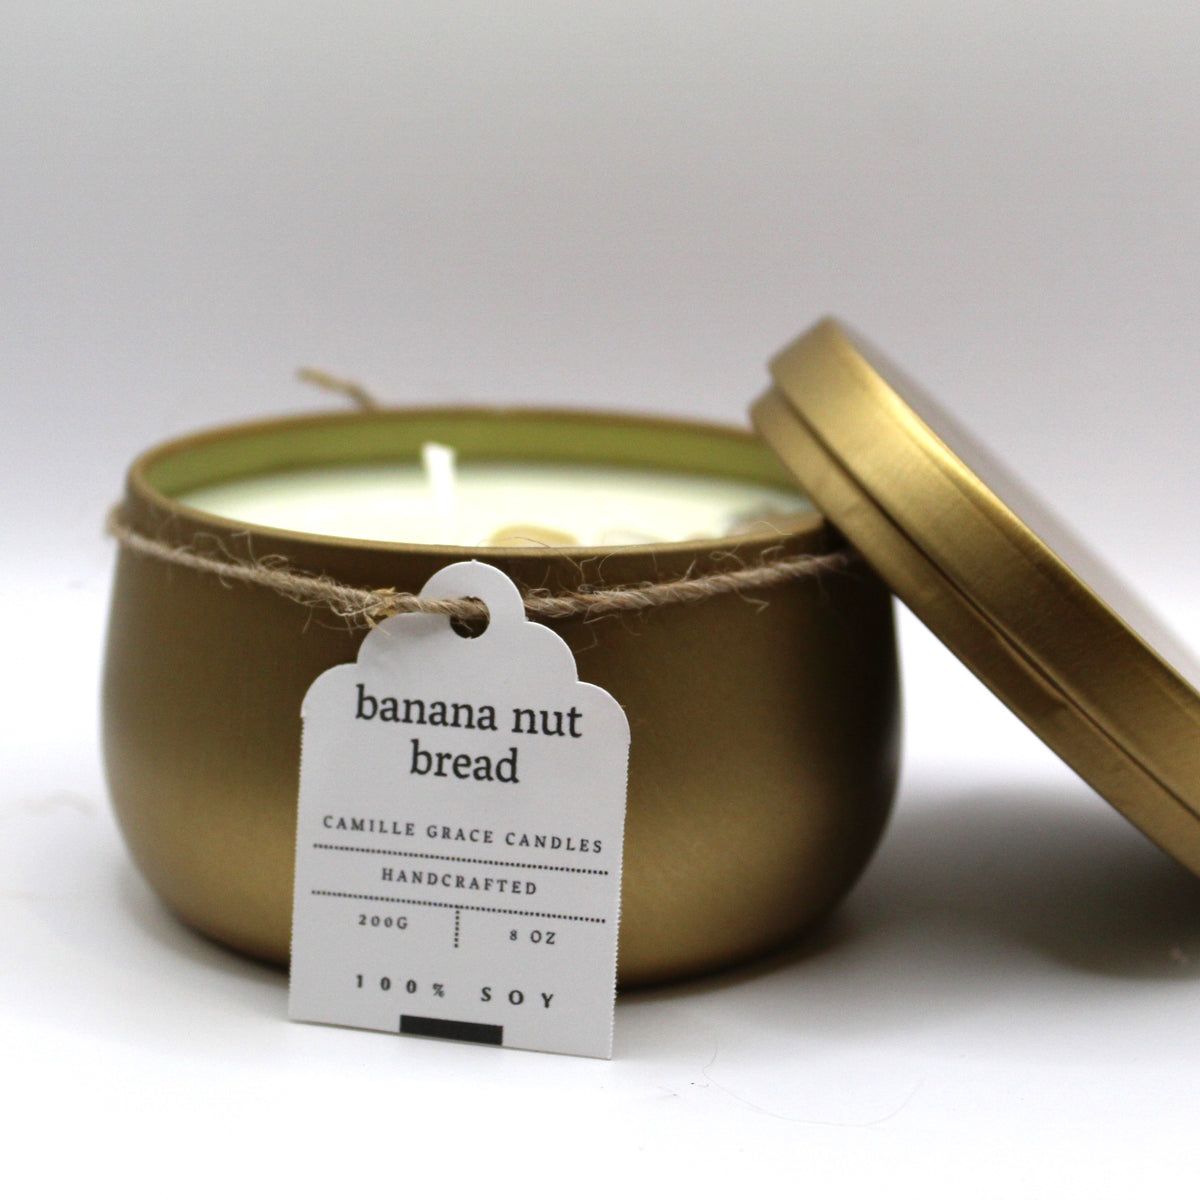 locally made soy candles